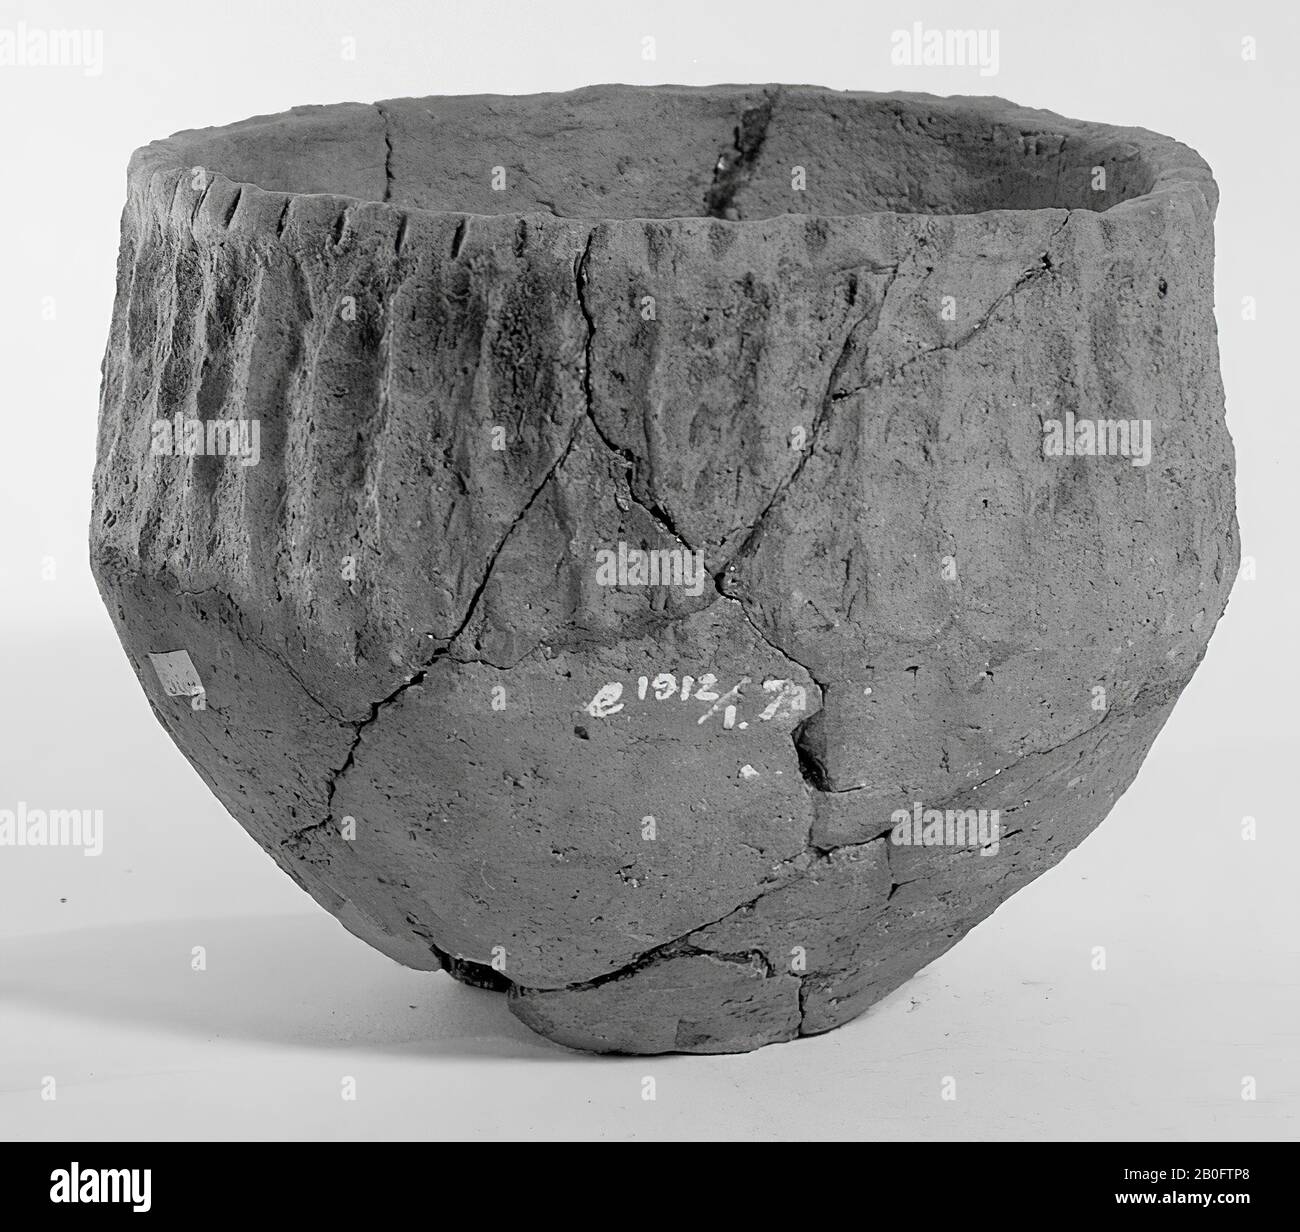 Jar of earthenware decorated with embossments. Additions, surface damage on the underside. Contains cremated residues., Pot, earthenware, h: 10.5 cm, diam: 14.3 cm, prehistory -800 Stock Photo